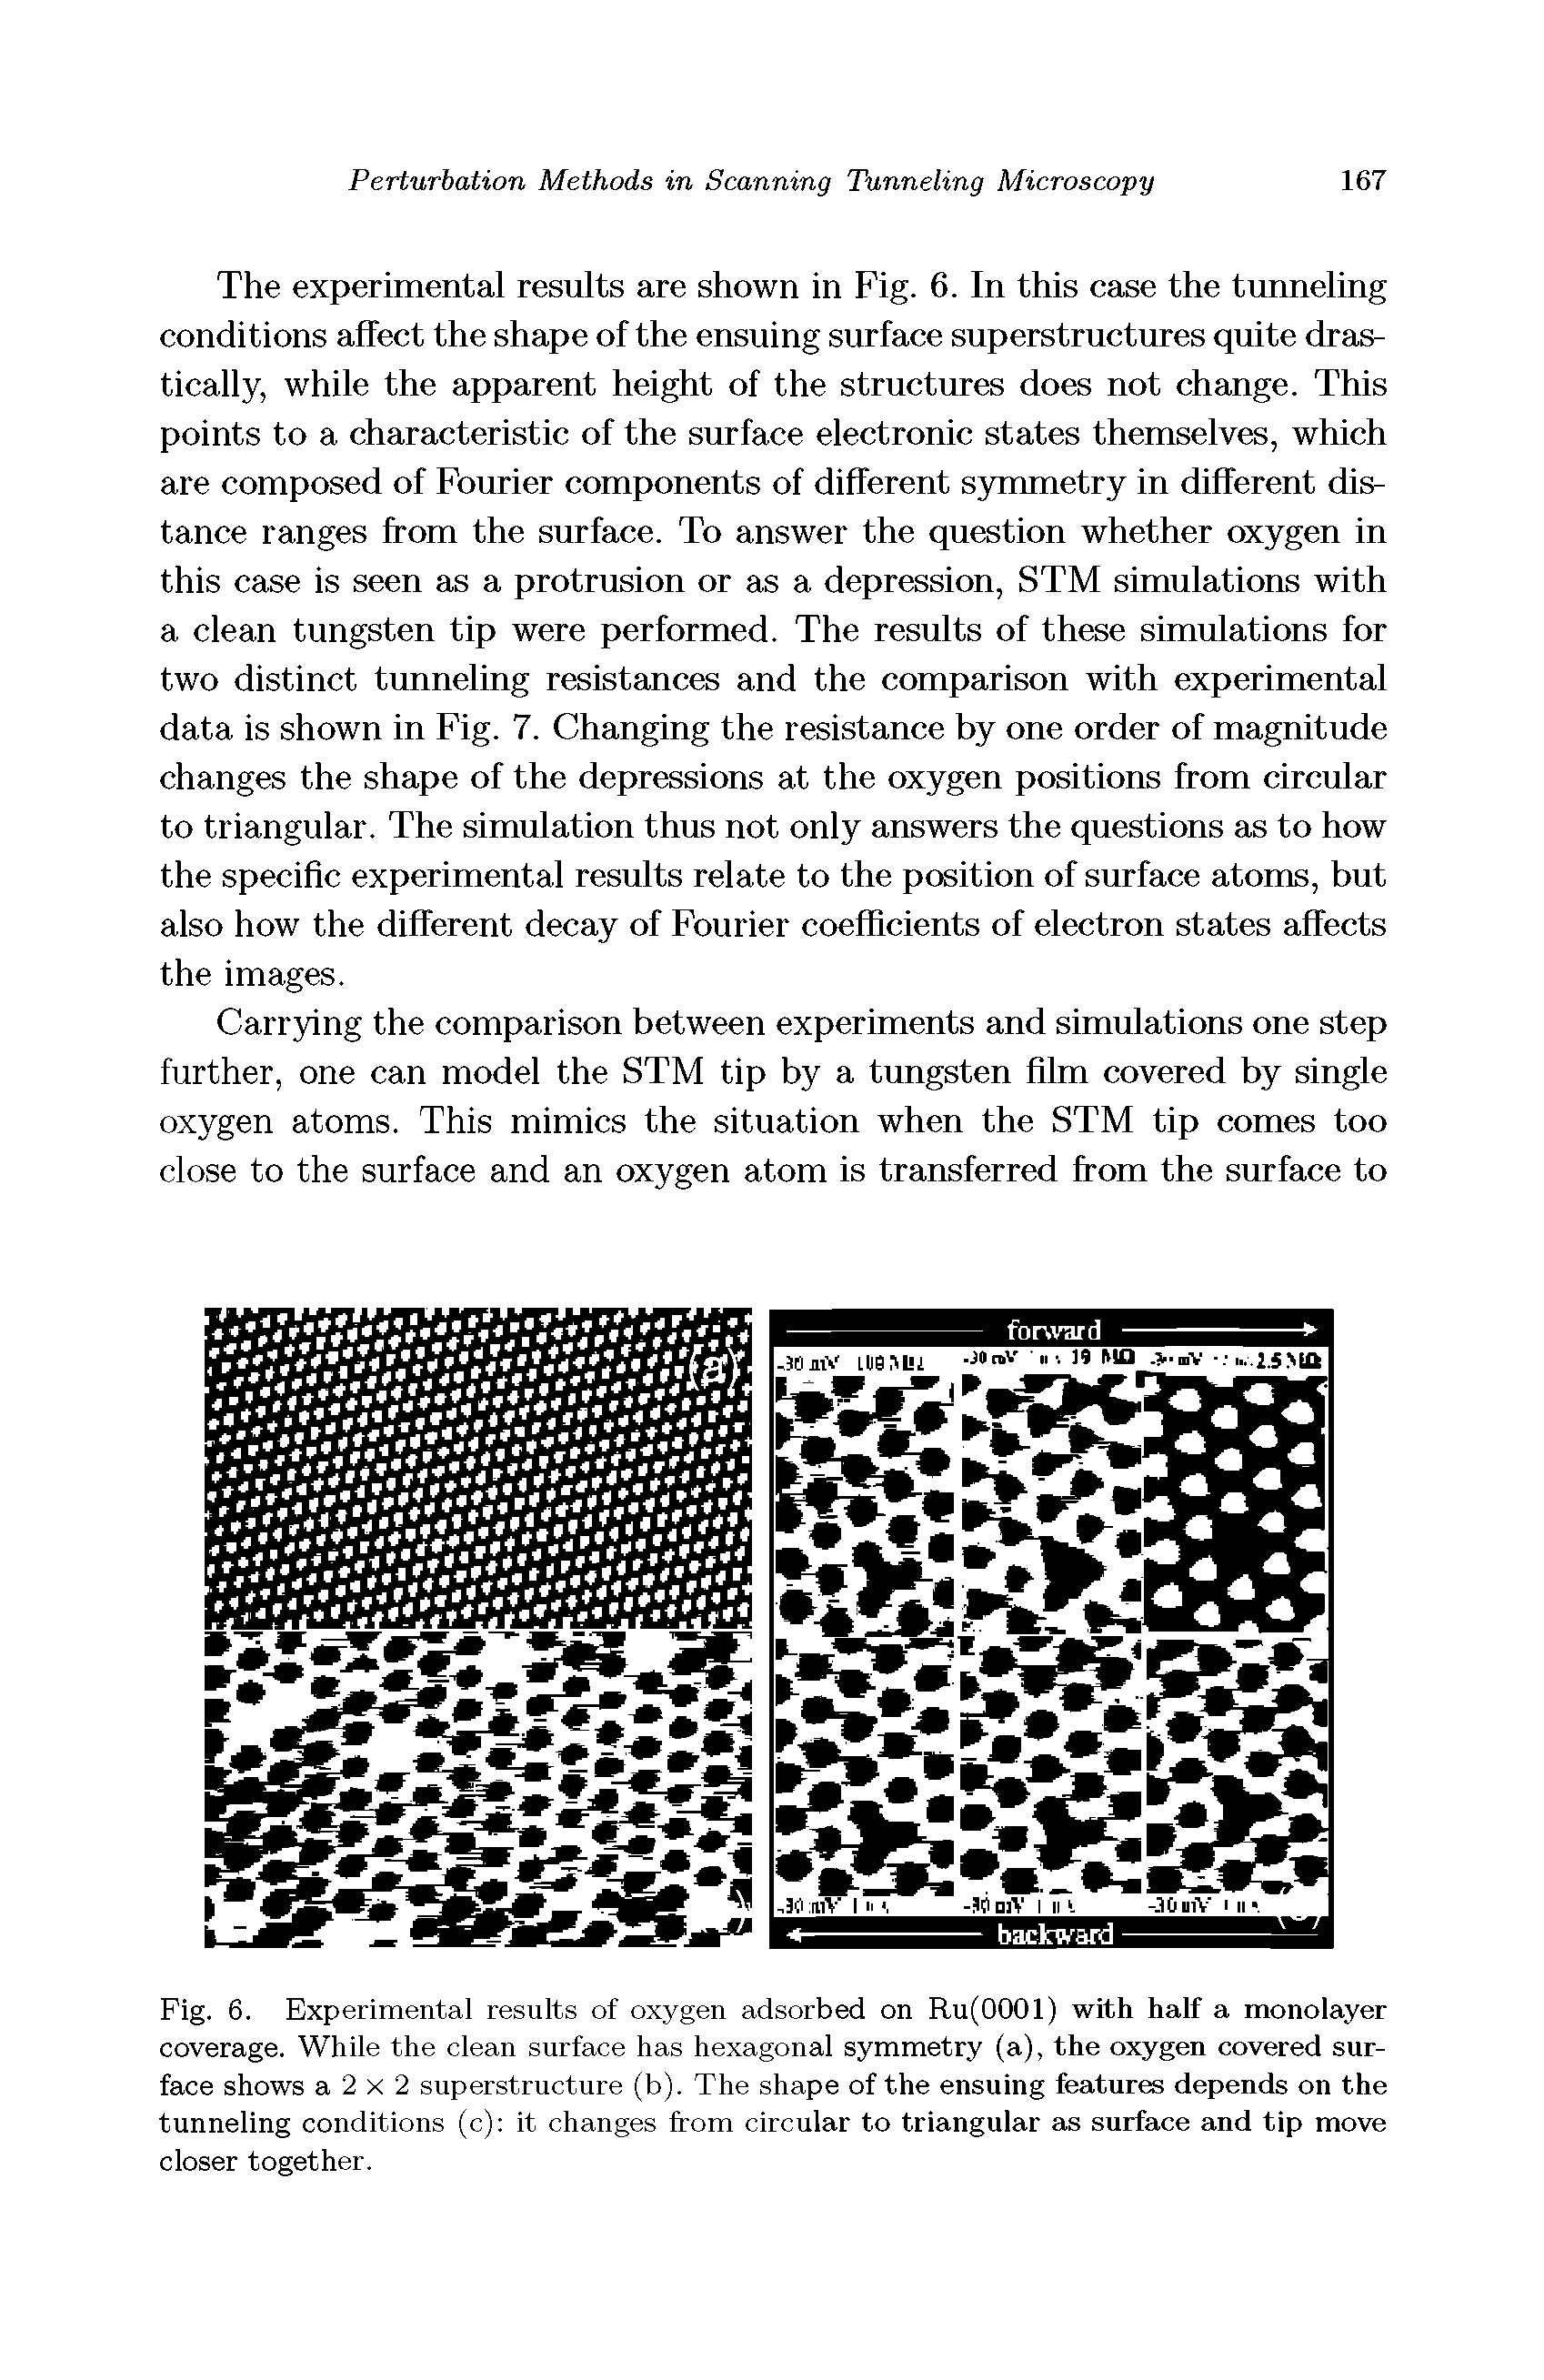 Fig. 6. Experimental results of oxygen adsorbed on Ru(0001) with half a monolayer coverage. While the clean surface has hexagonal symmetry (a), the oxygen covered surface shows a 2 X 2 superstructure (b). The shape of the ensuing features depends on the tunneling conditions (c) it changes from circular to triangular as surface and tip move closer together.